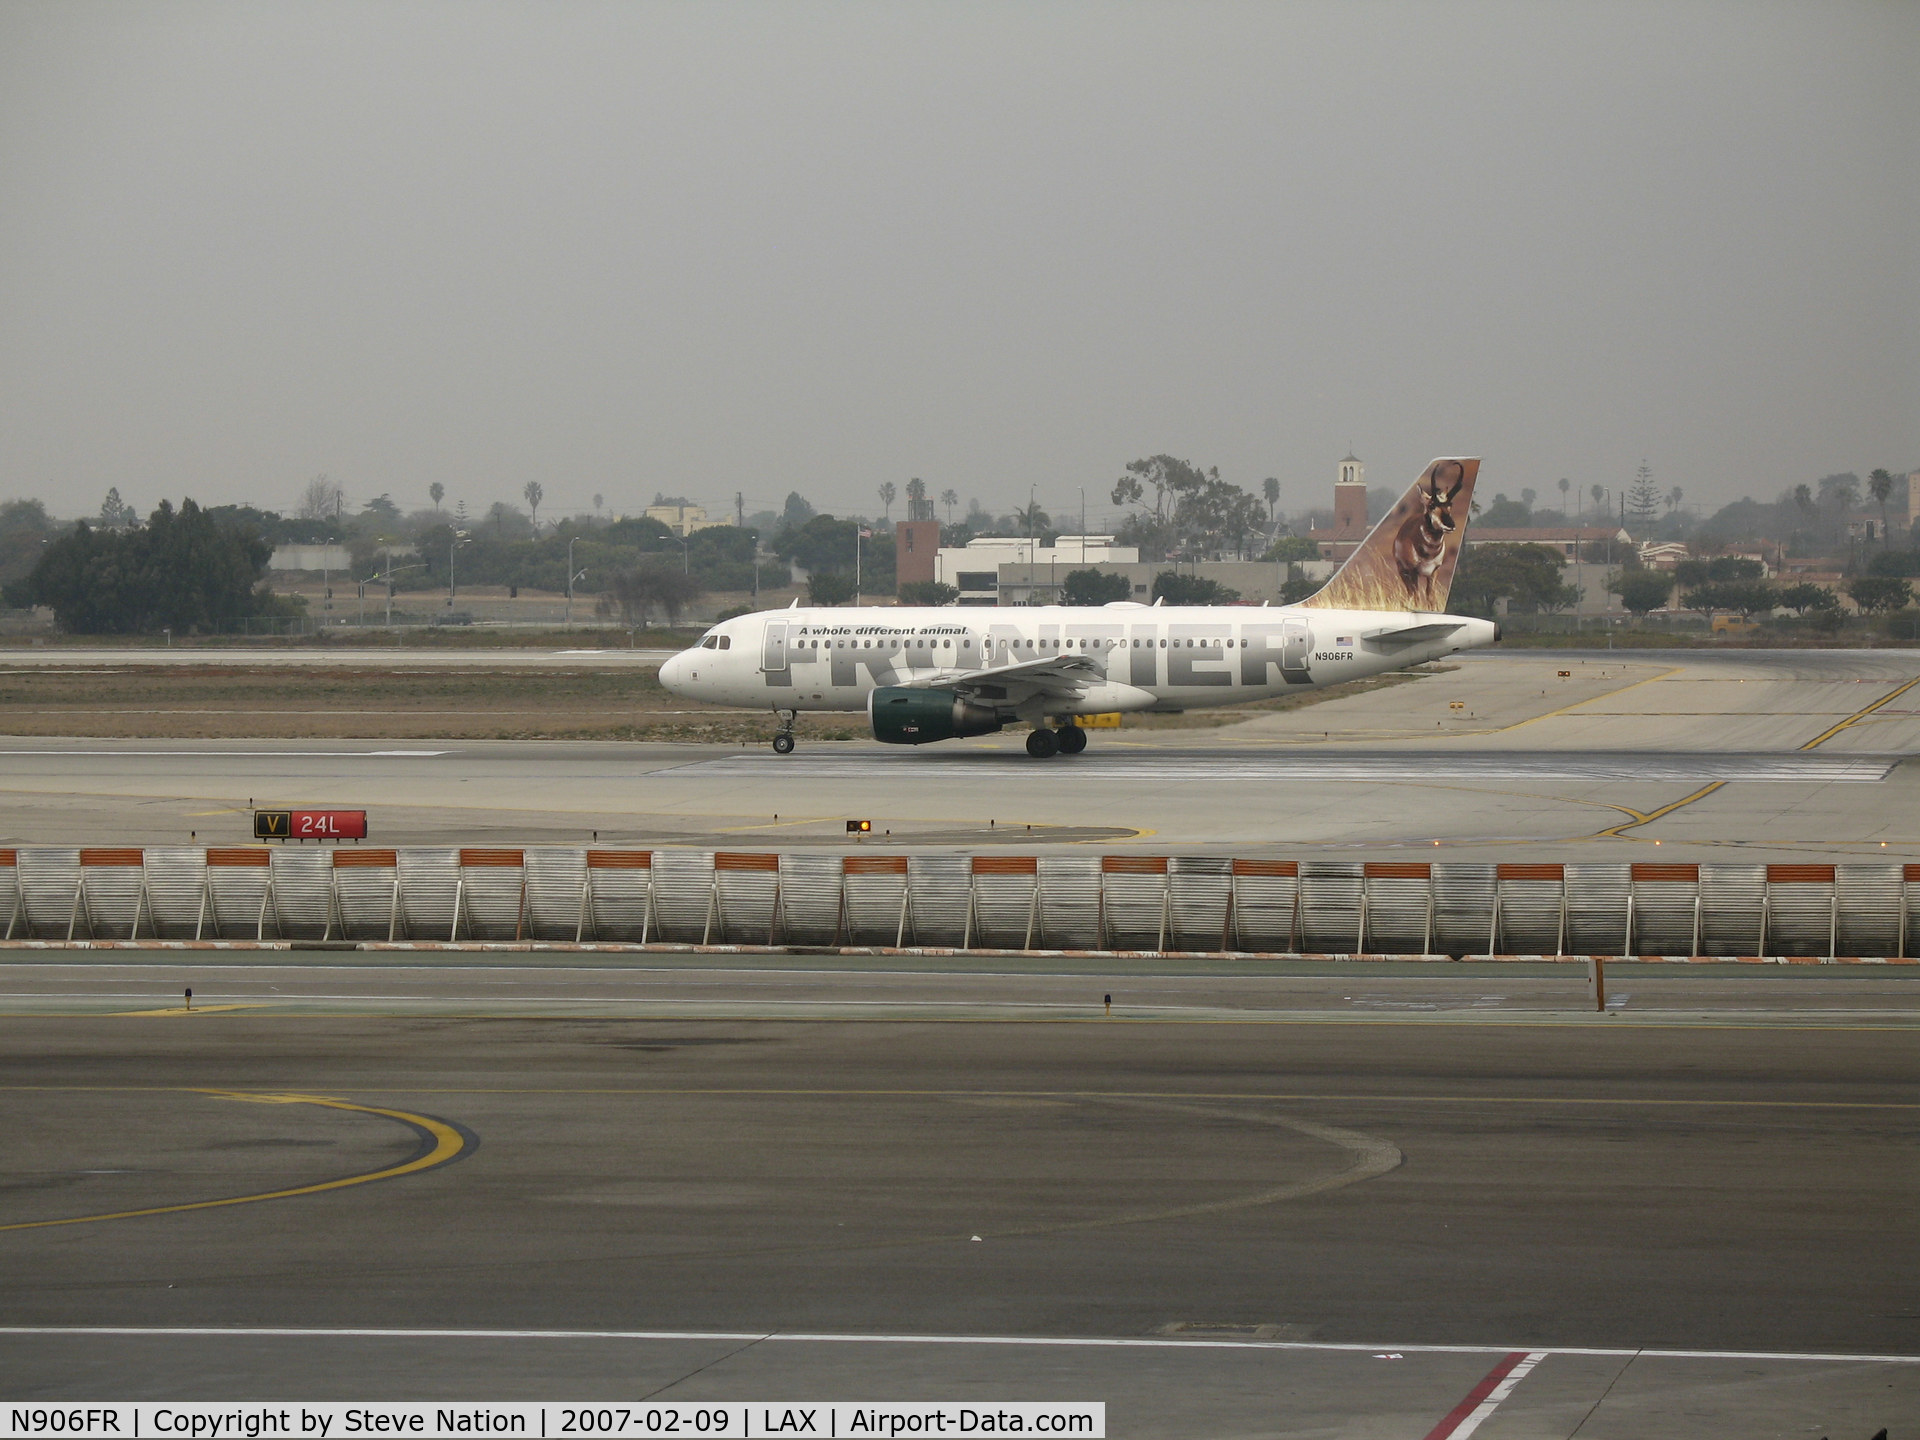 N906FR, 2002 Airbus A319-111 C/N 1684, Frontier A319-111 with Elk on tail rolling @ LAX